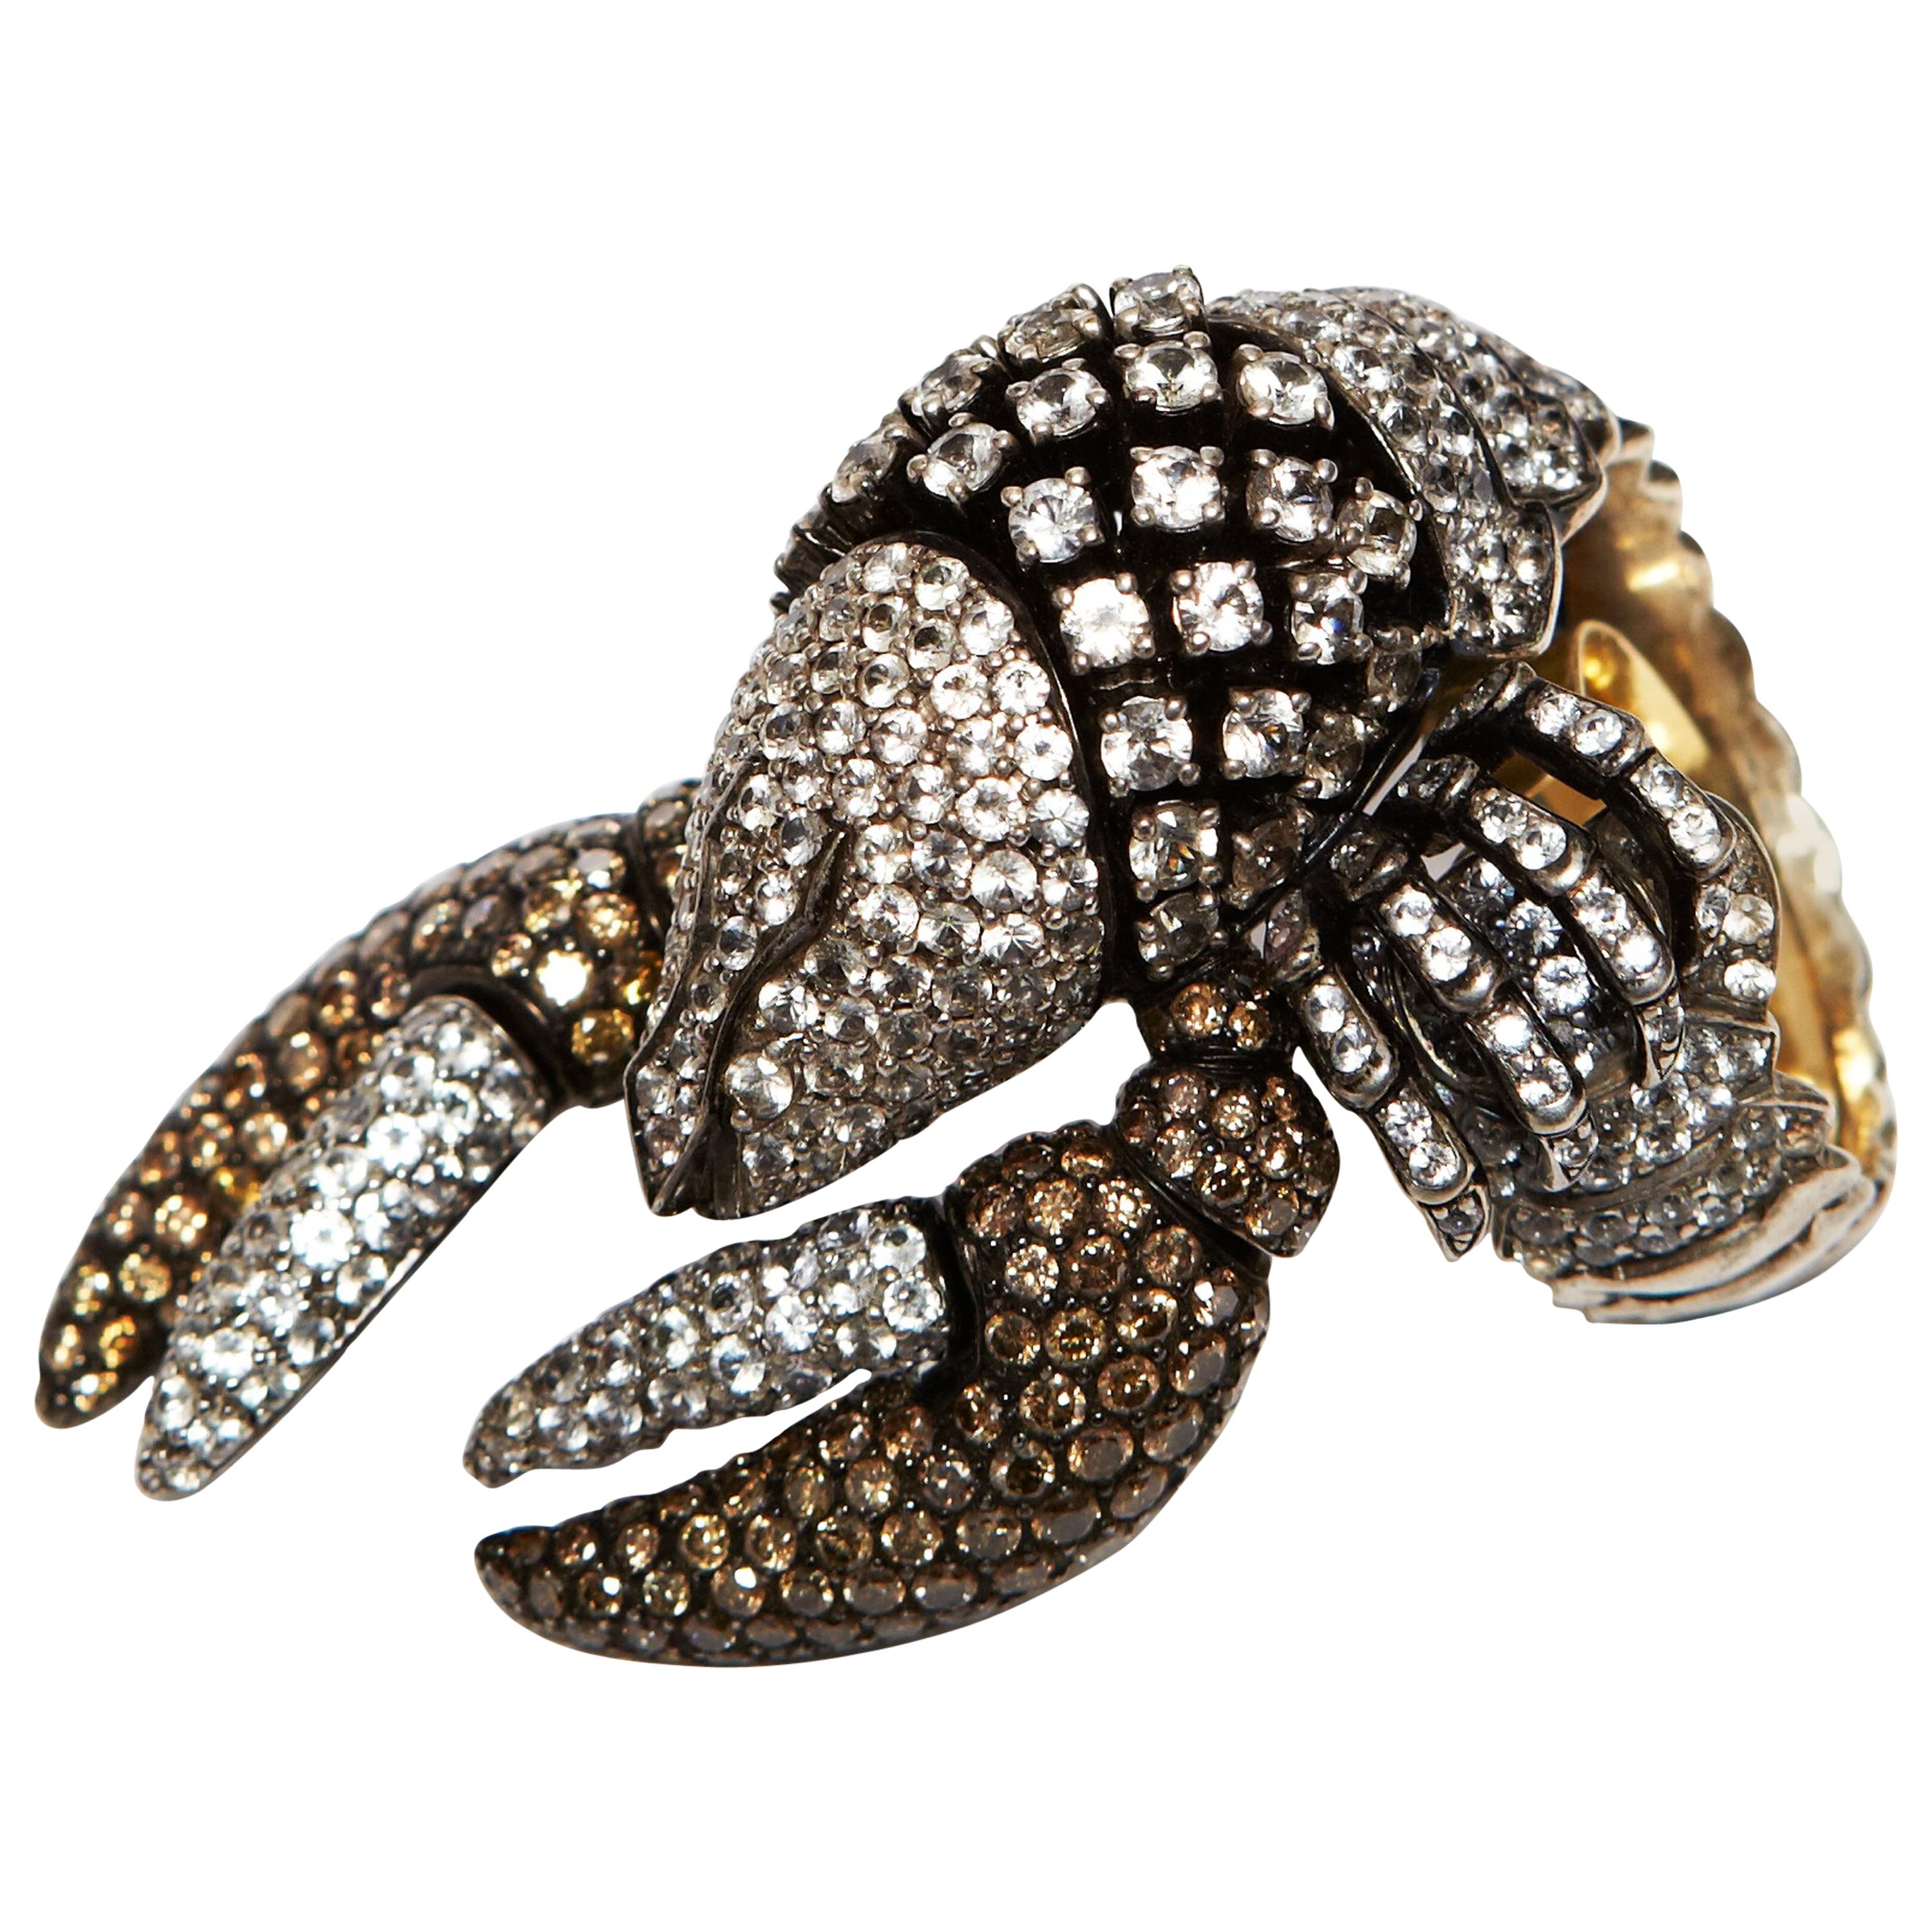 Helen Yarmak Sterling Silver, Diamond and Sapphire "Crab" Form Ring For Sale